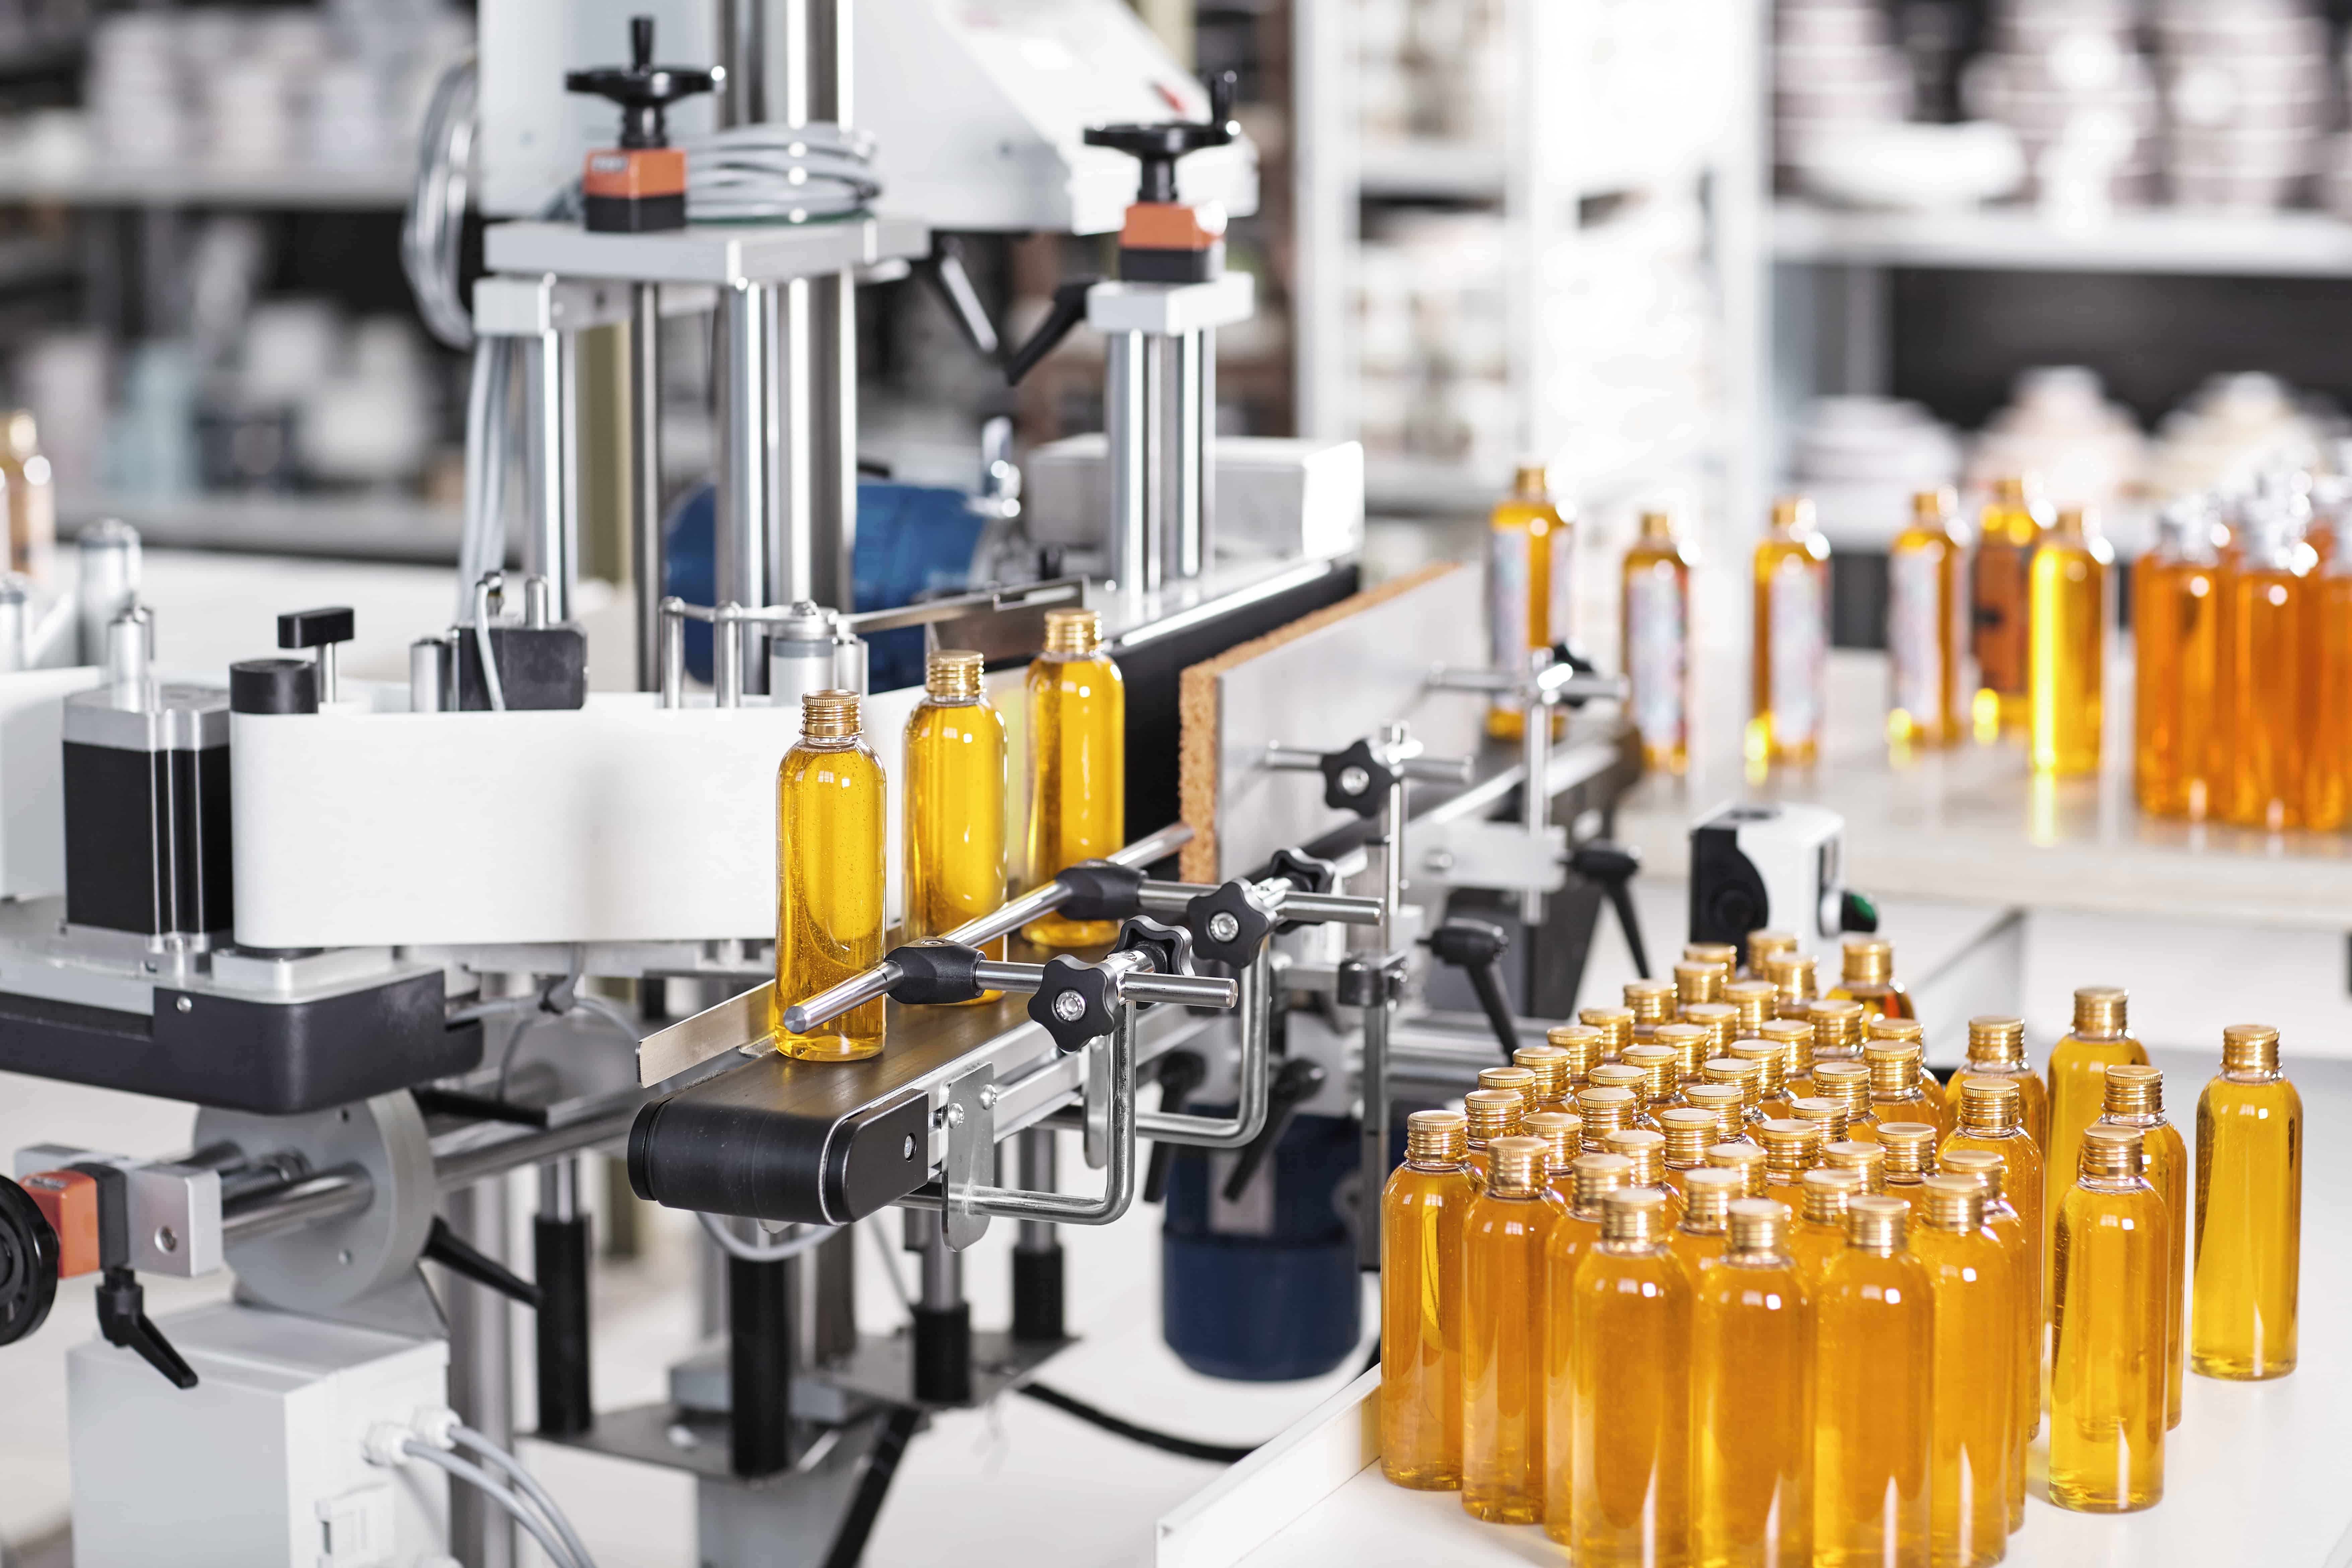 Achieve high quality cosmetic products through real-time in-line viscosity control during manufacturing – improve consistency, texture and sensorial attributes